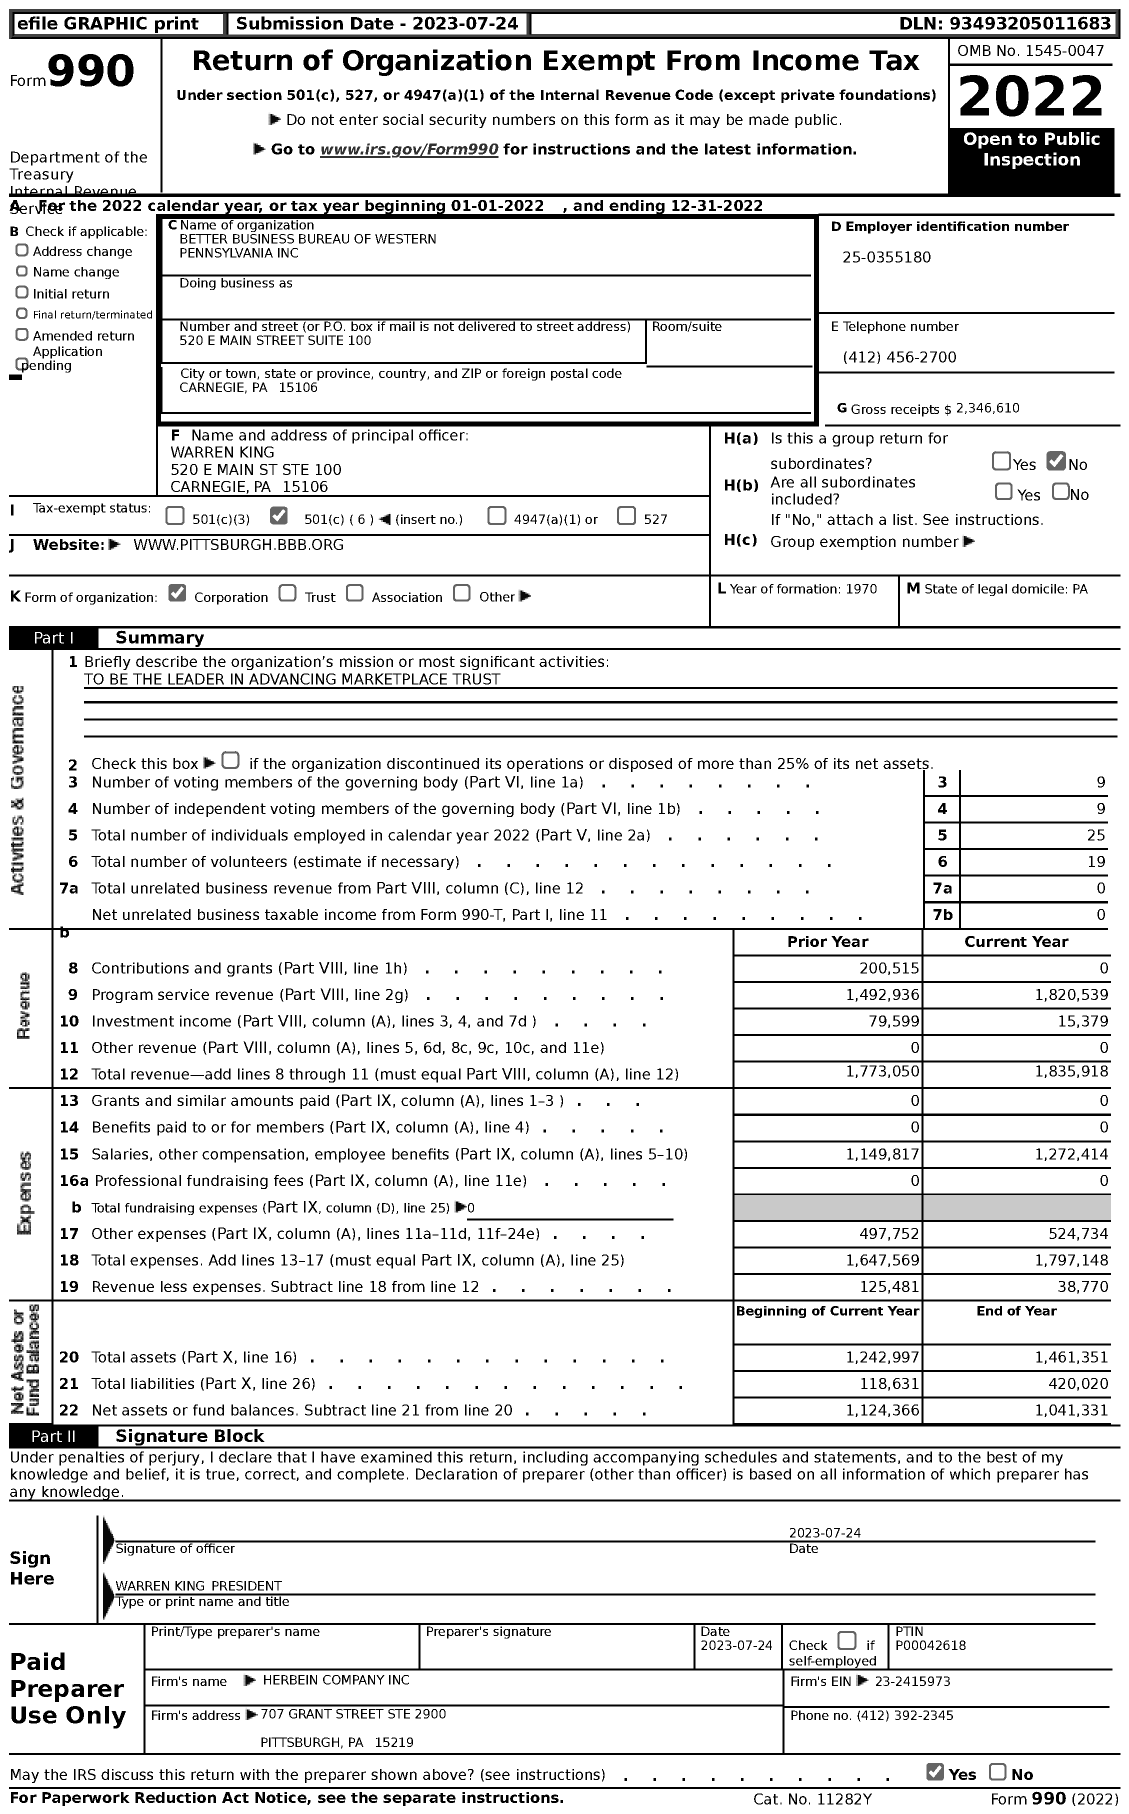 Image of first page of 2022 Form 990 for Better Business Bureau of Western Pennsylvania (BBB)